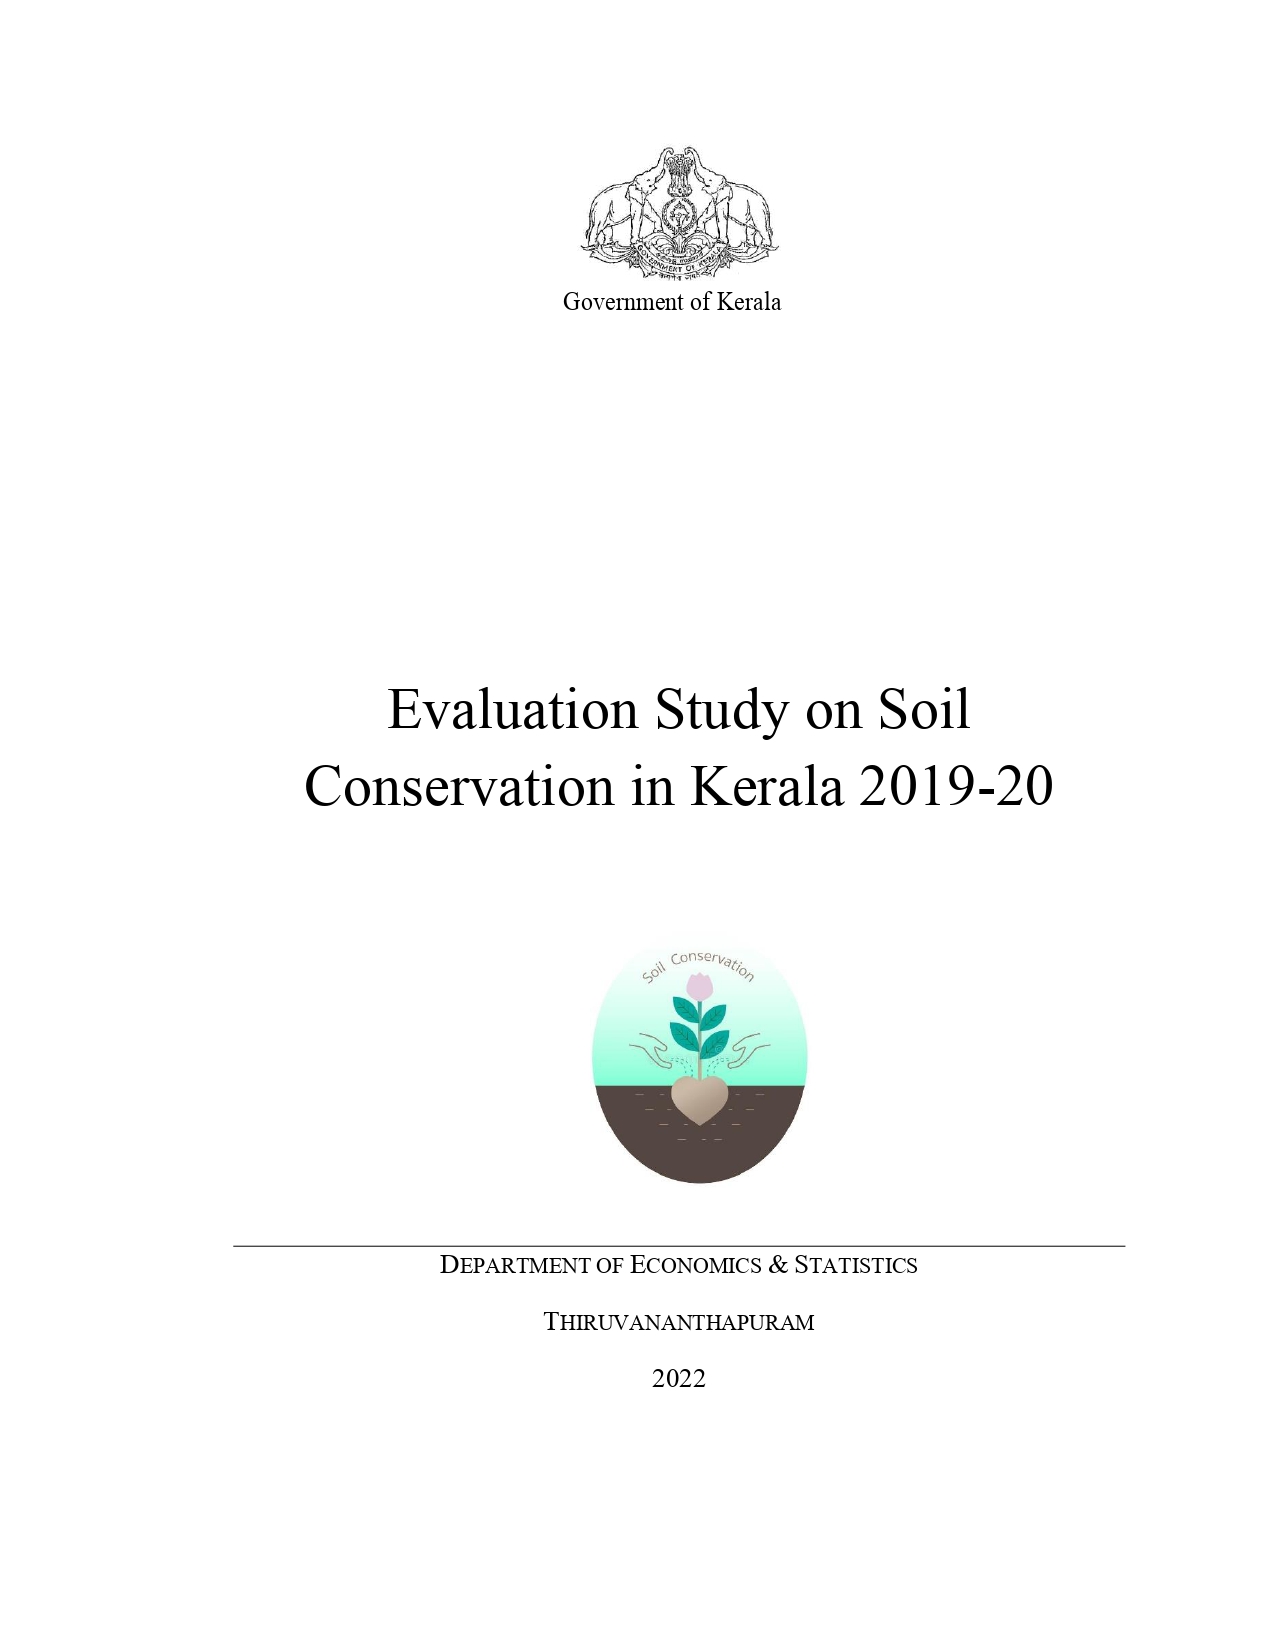 Evaluation Study On Soil Conservation In Kerala 2019-20